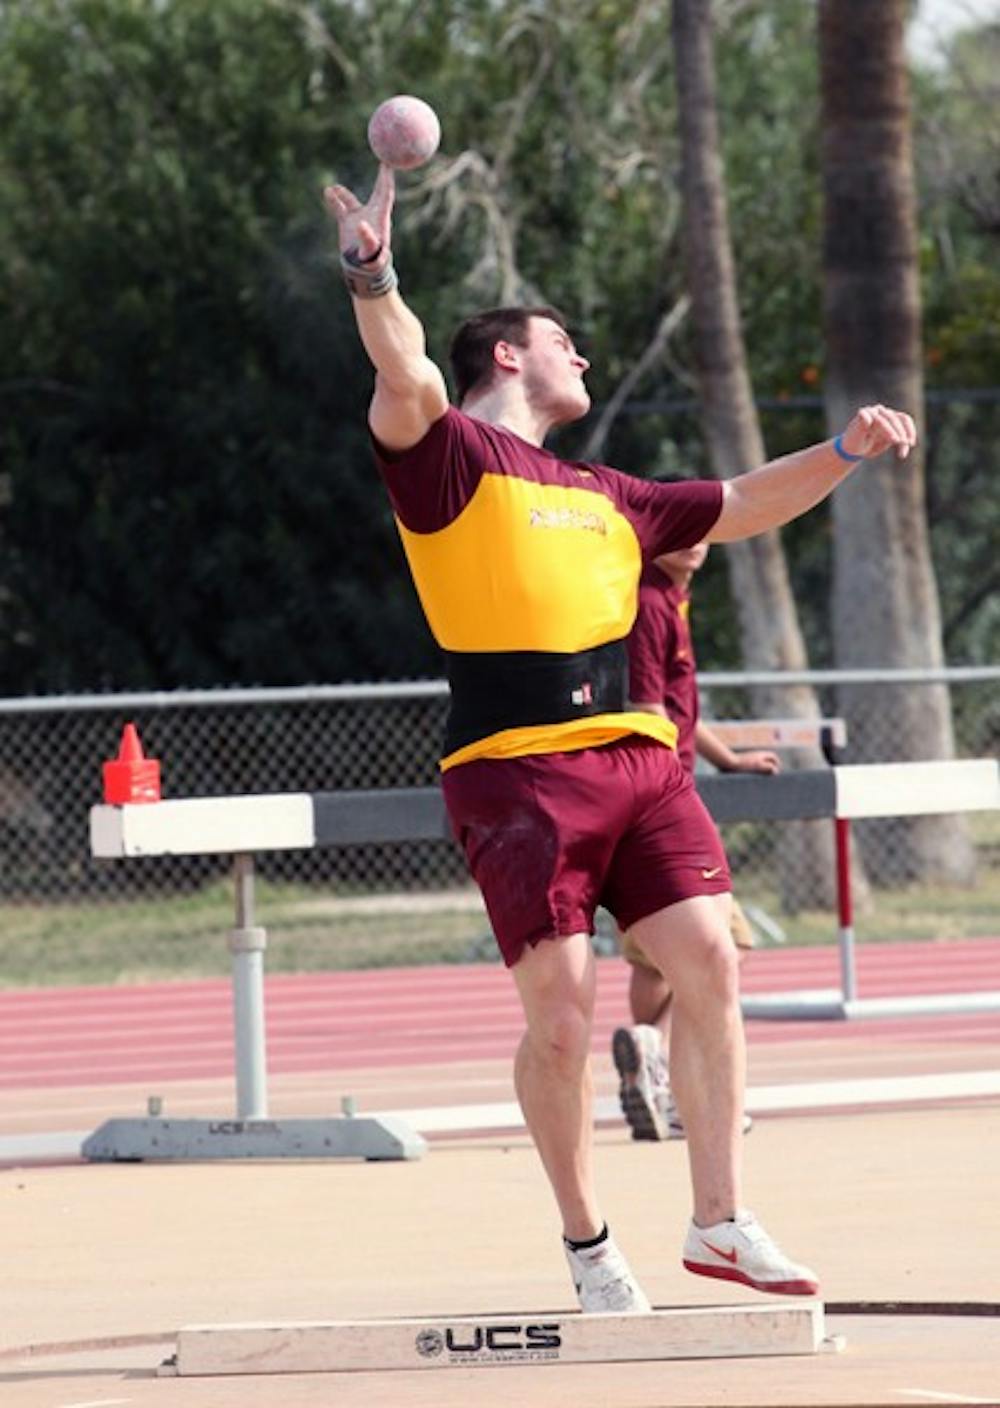 Jordan Clarke throws the shot put at the Baldy Castillo Invite on Mar. 19, 2011. Clarke looks to build upon his early season success at the Texas A&M Mondo Challenge this weekend. (Photo by Beth Easterbrook)